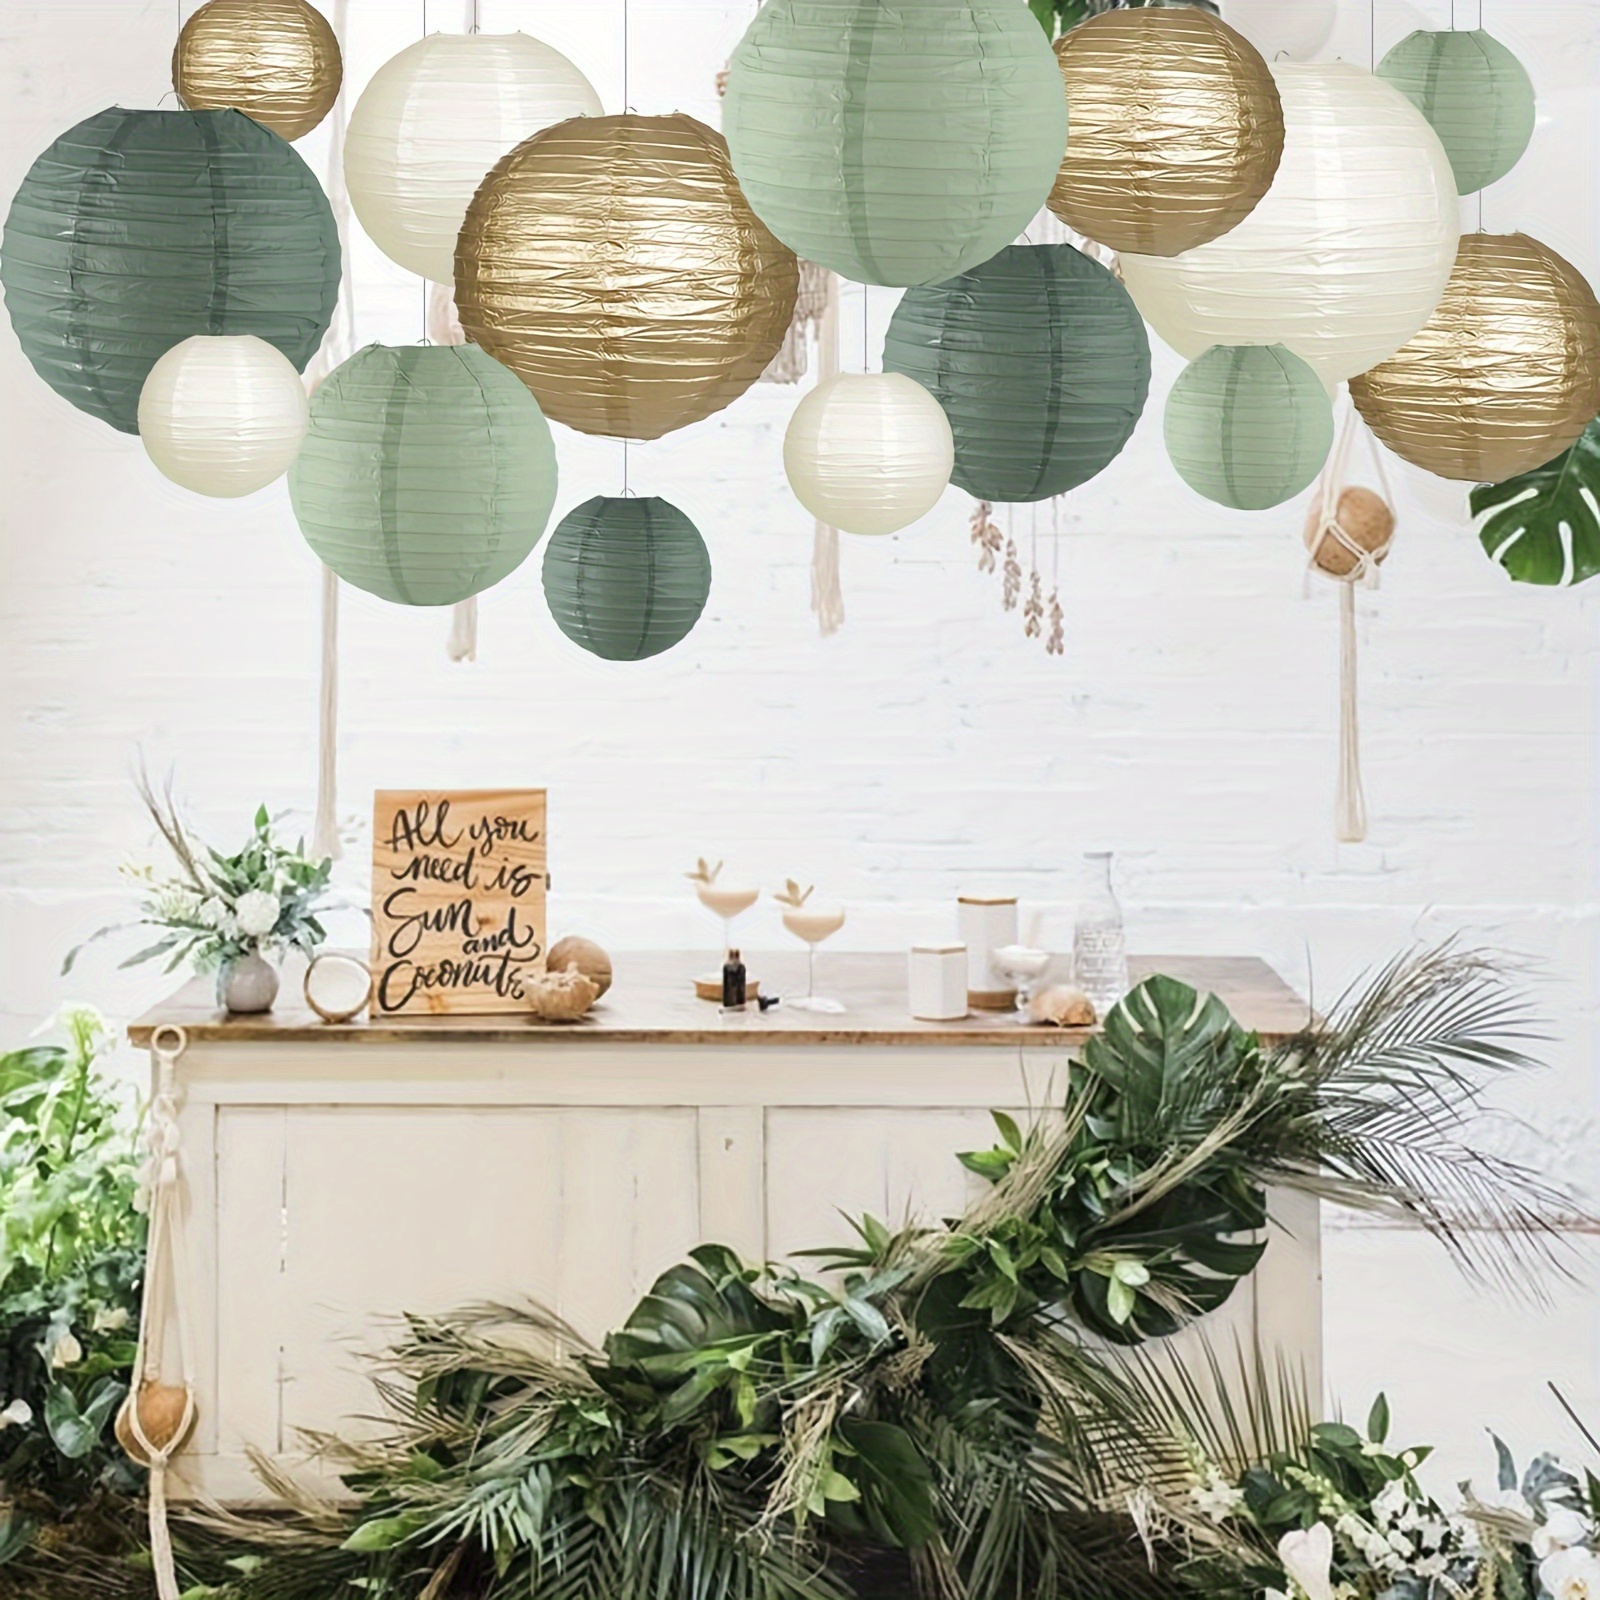 

15-piece Elegant Paper Lanterns - Round Hanging Decorations For Rustic Parties, Bridal Showers & Weddings - Available In Sage Green, Ivory & Gold